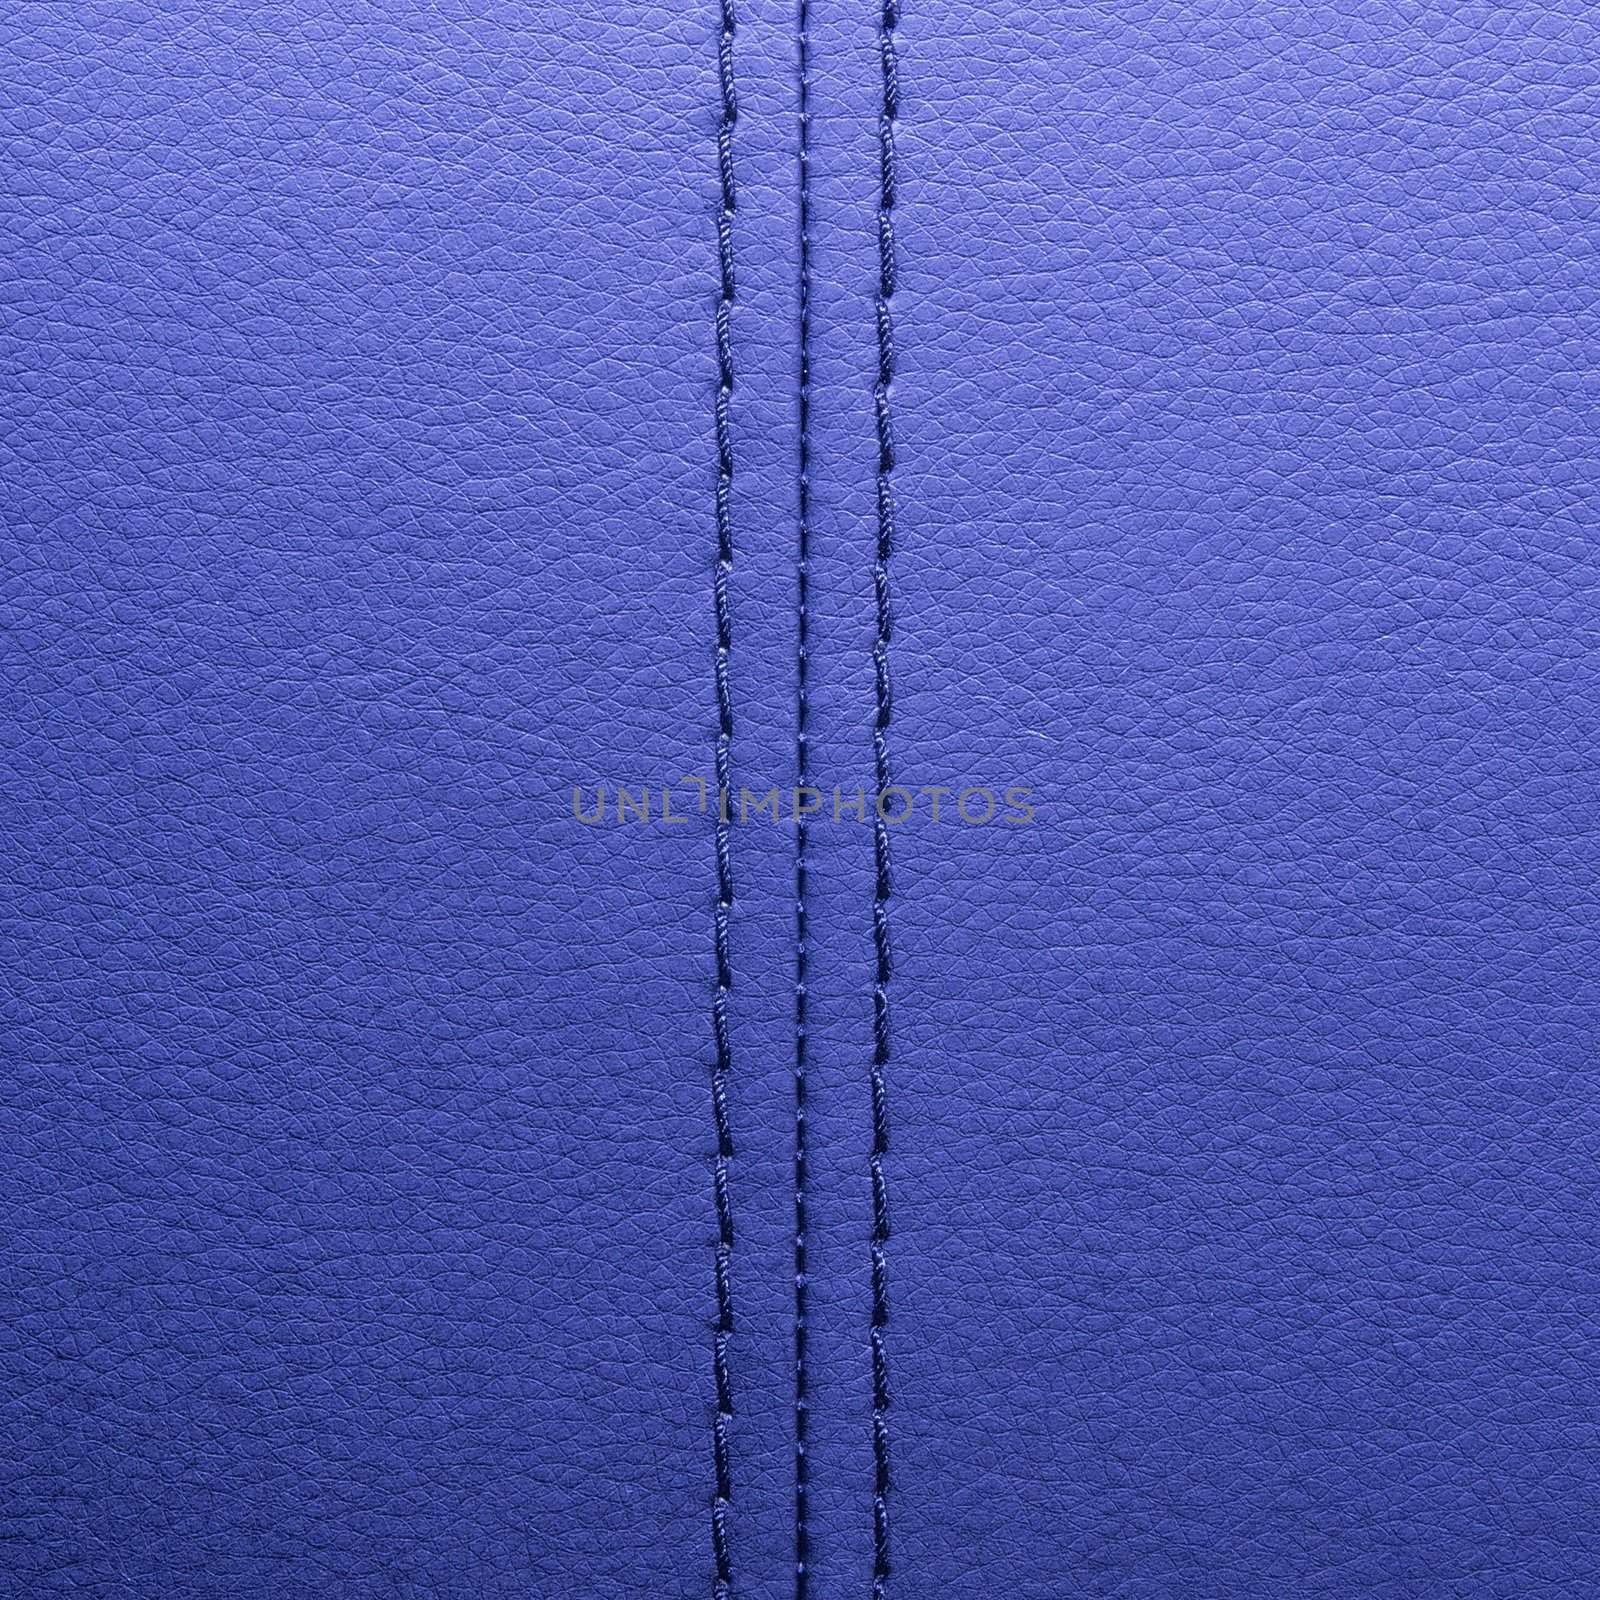 Violet leather with seam